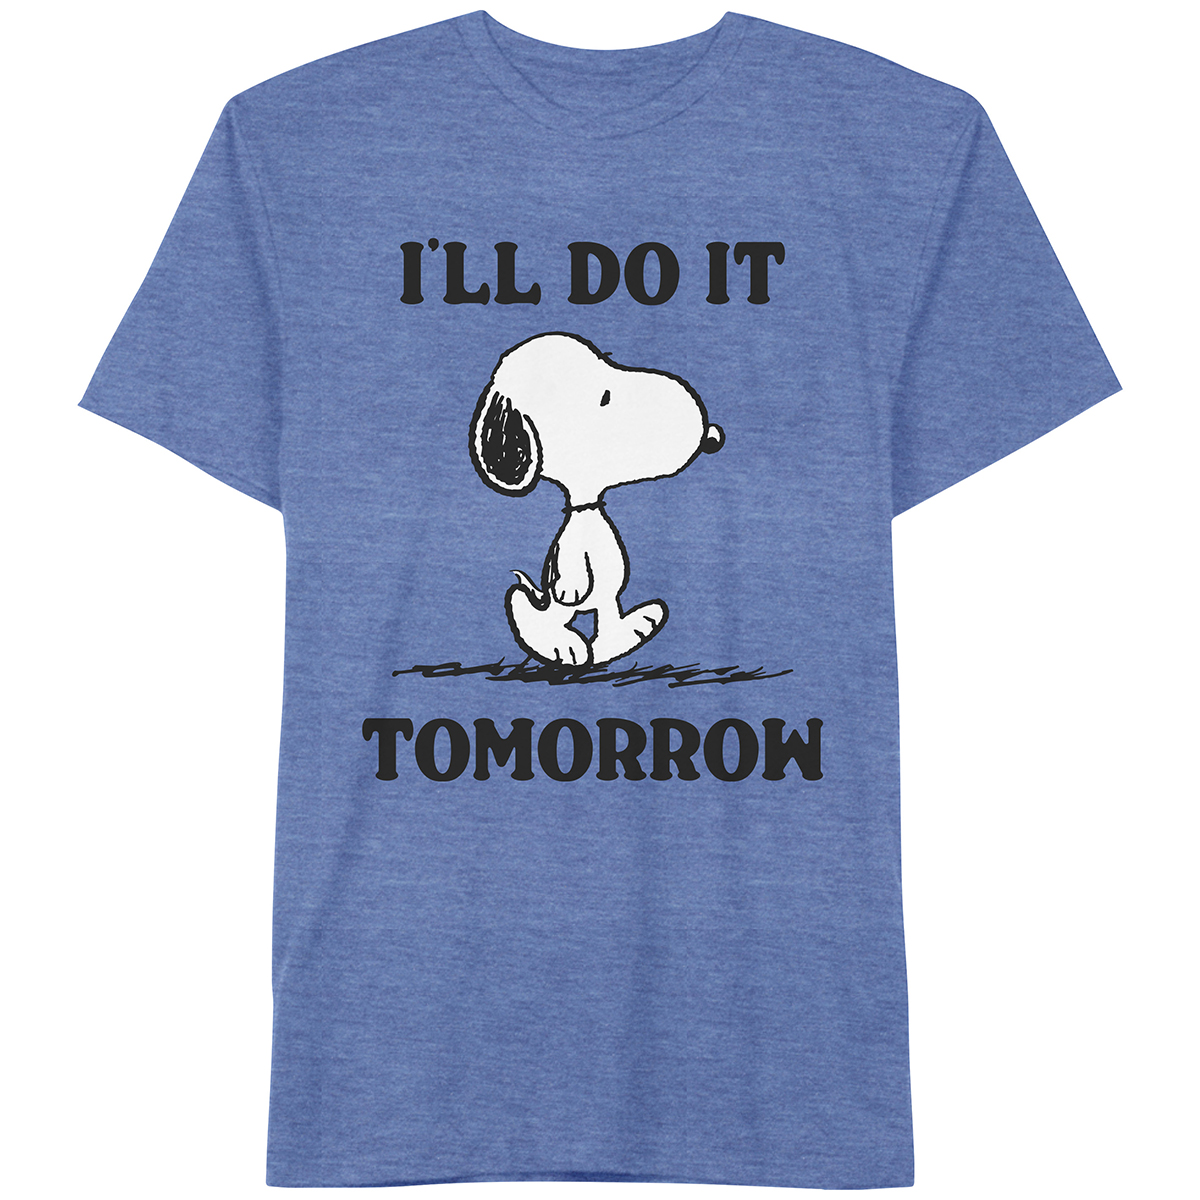 Hybrid Young Men's Snoopy Tomorrow Short-Sleeve Graphic Tee